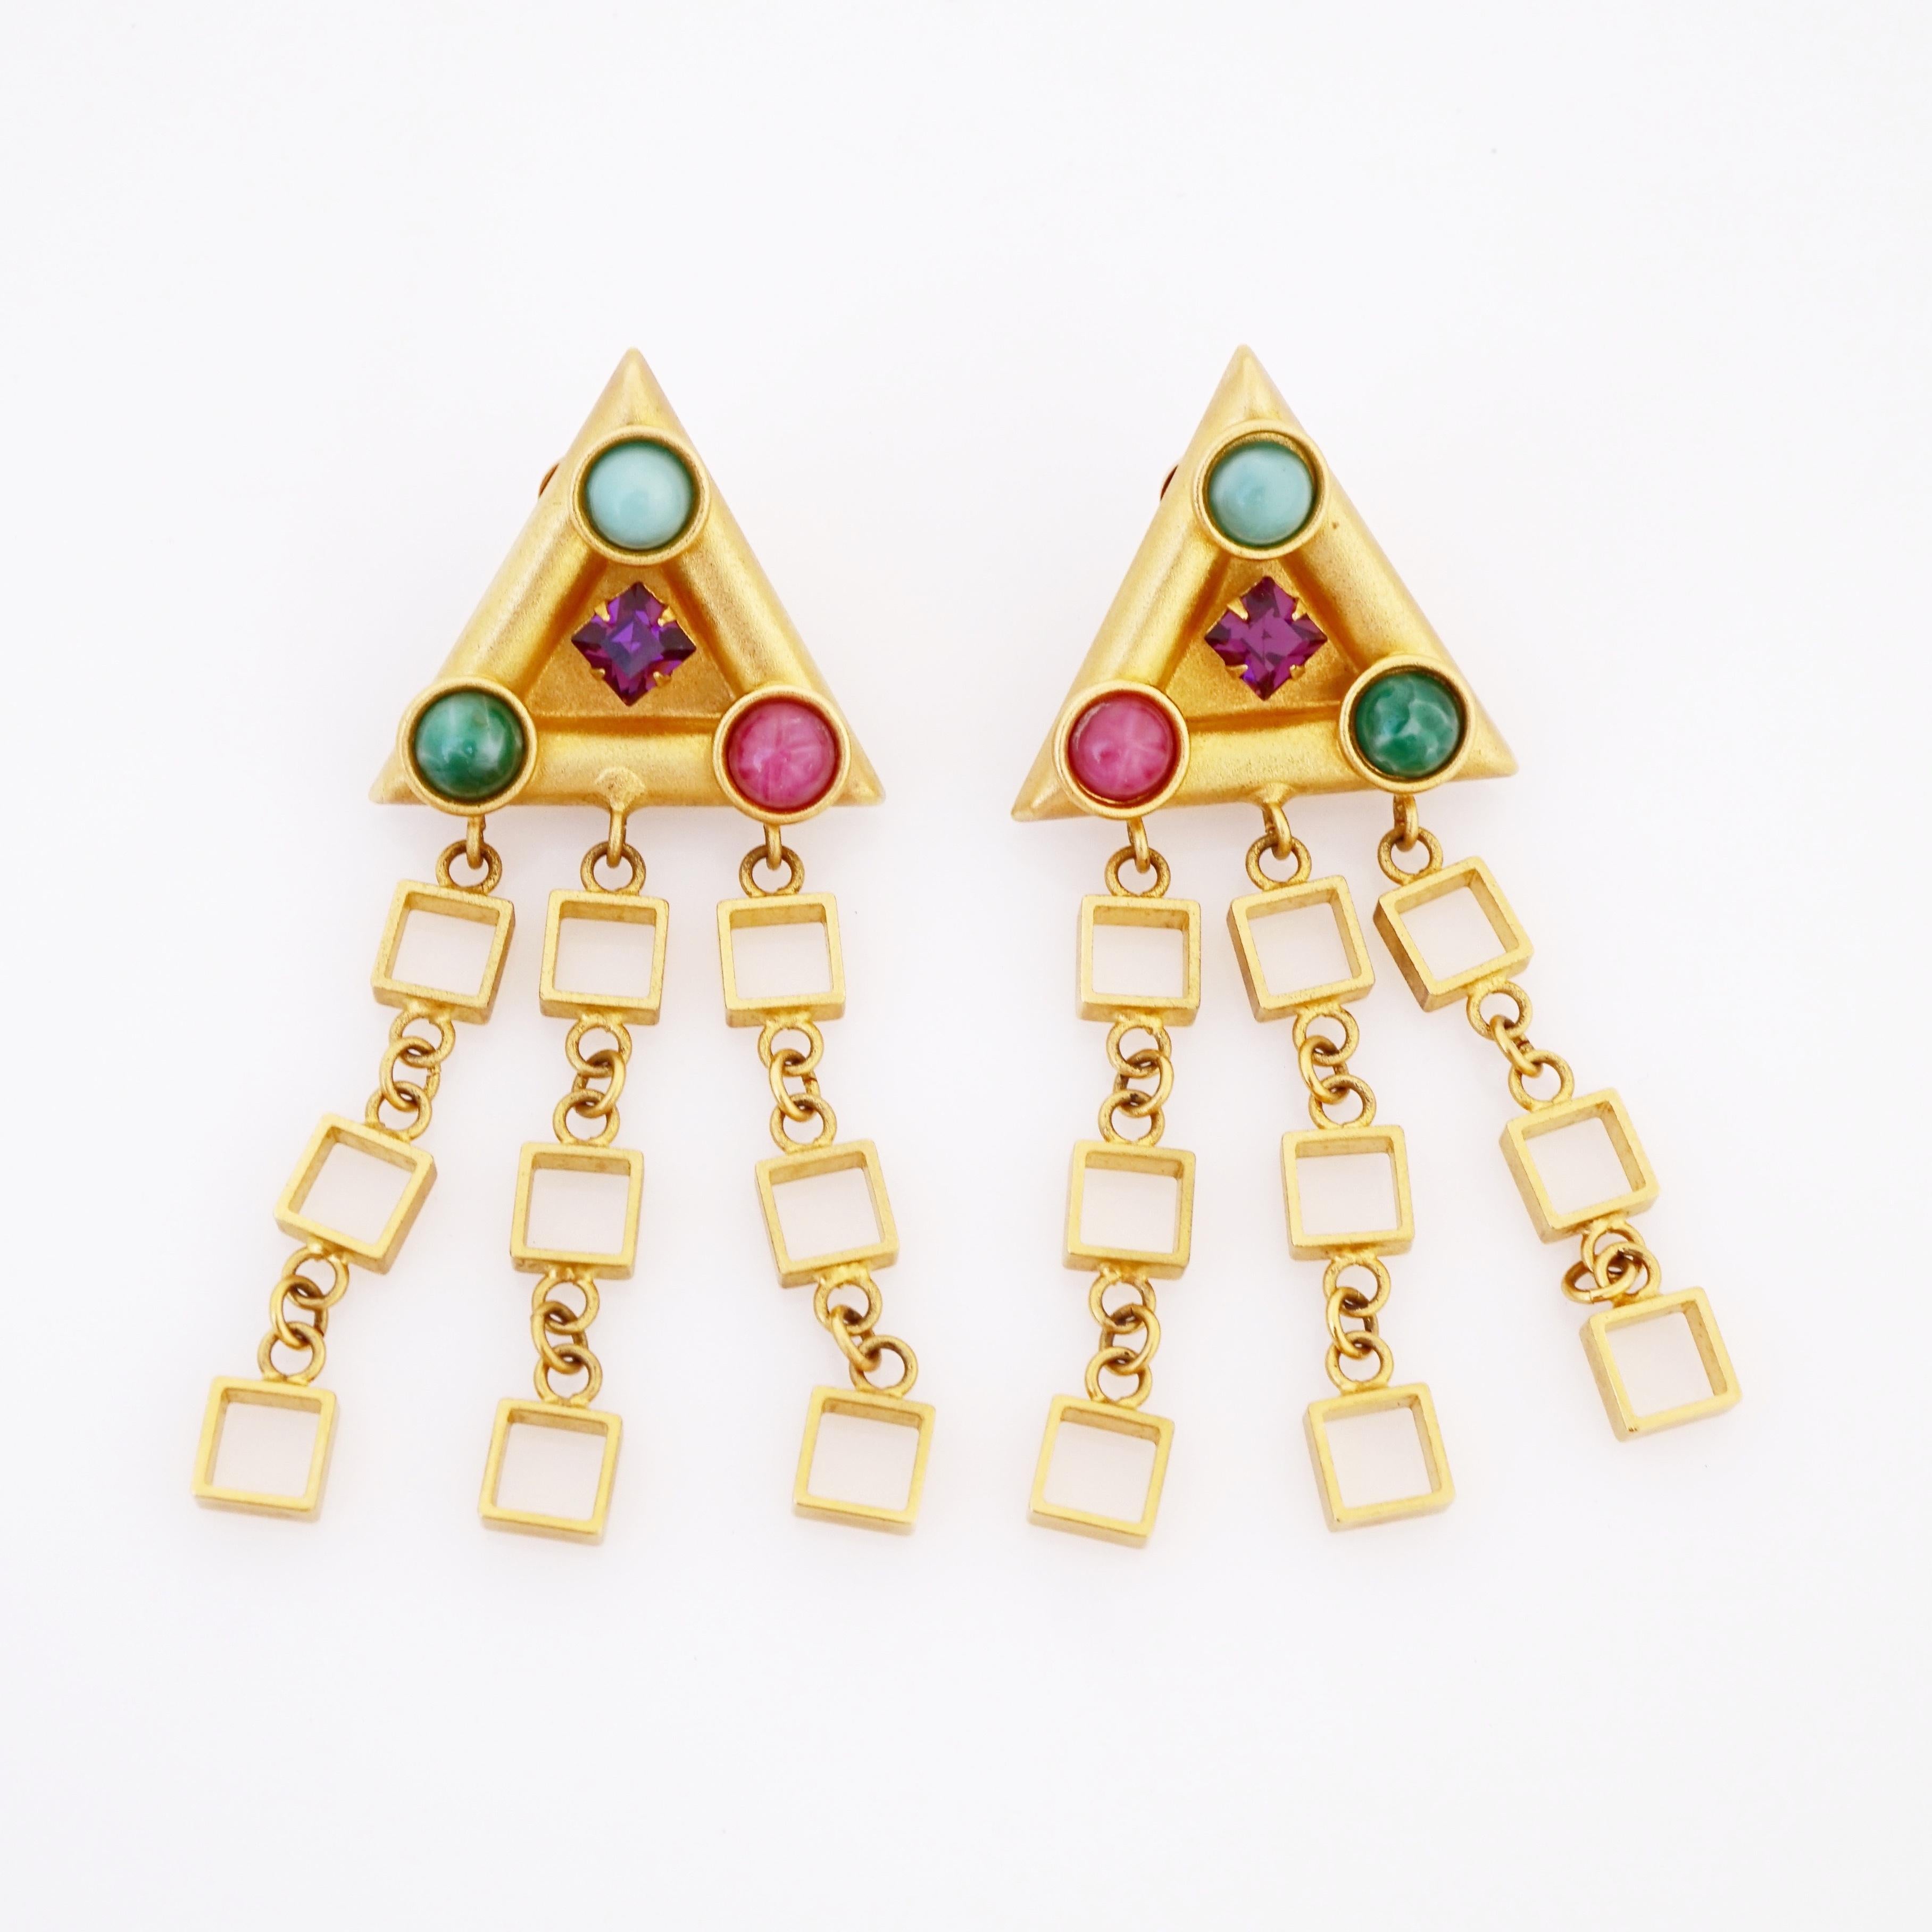 - Vintage item

- Collectible costume jewelry piece from the '80s

- Each earring measures 3.2